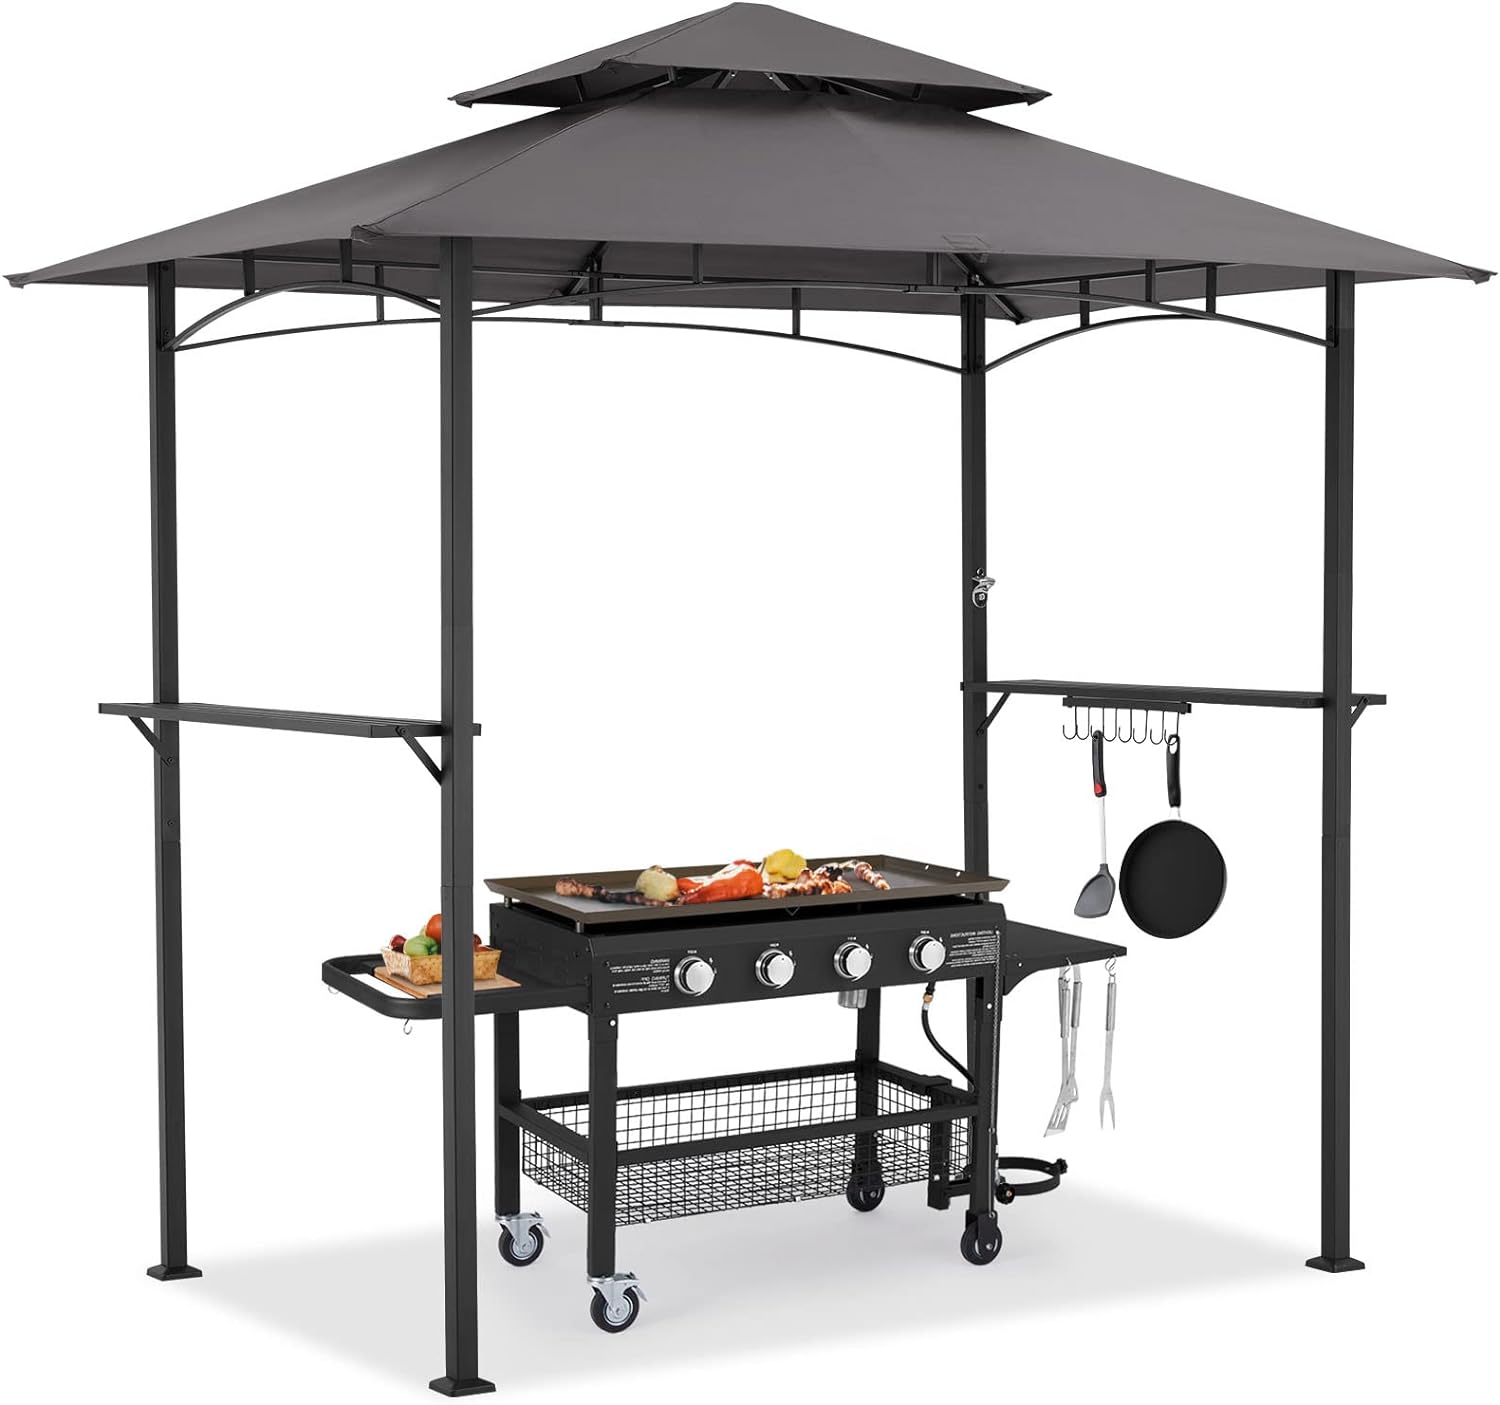 AECOJOY 8' x 5' Grill Gazebo, Grill Canopy for Outdoor Grill, 2- Tier BBQ Gazebo Shelter for Patio, Backyard and More (Dark Grey)